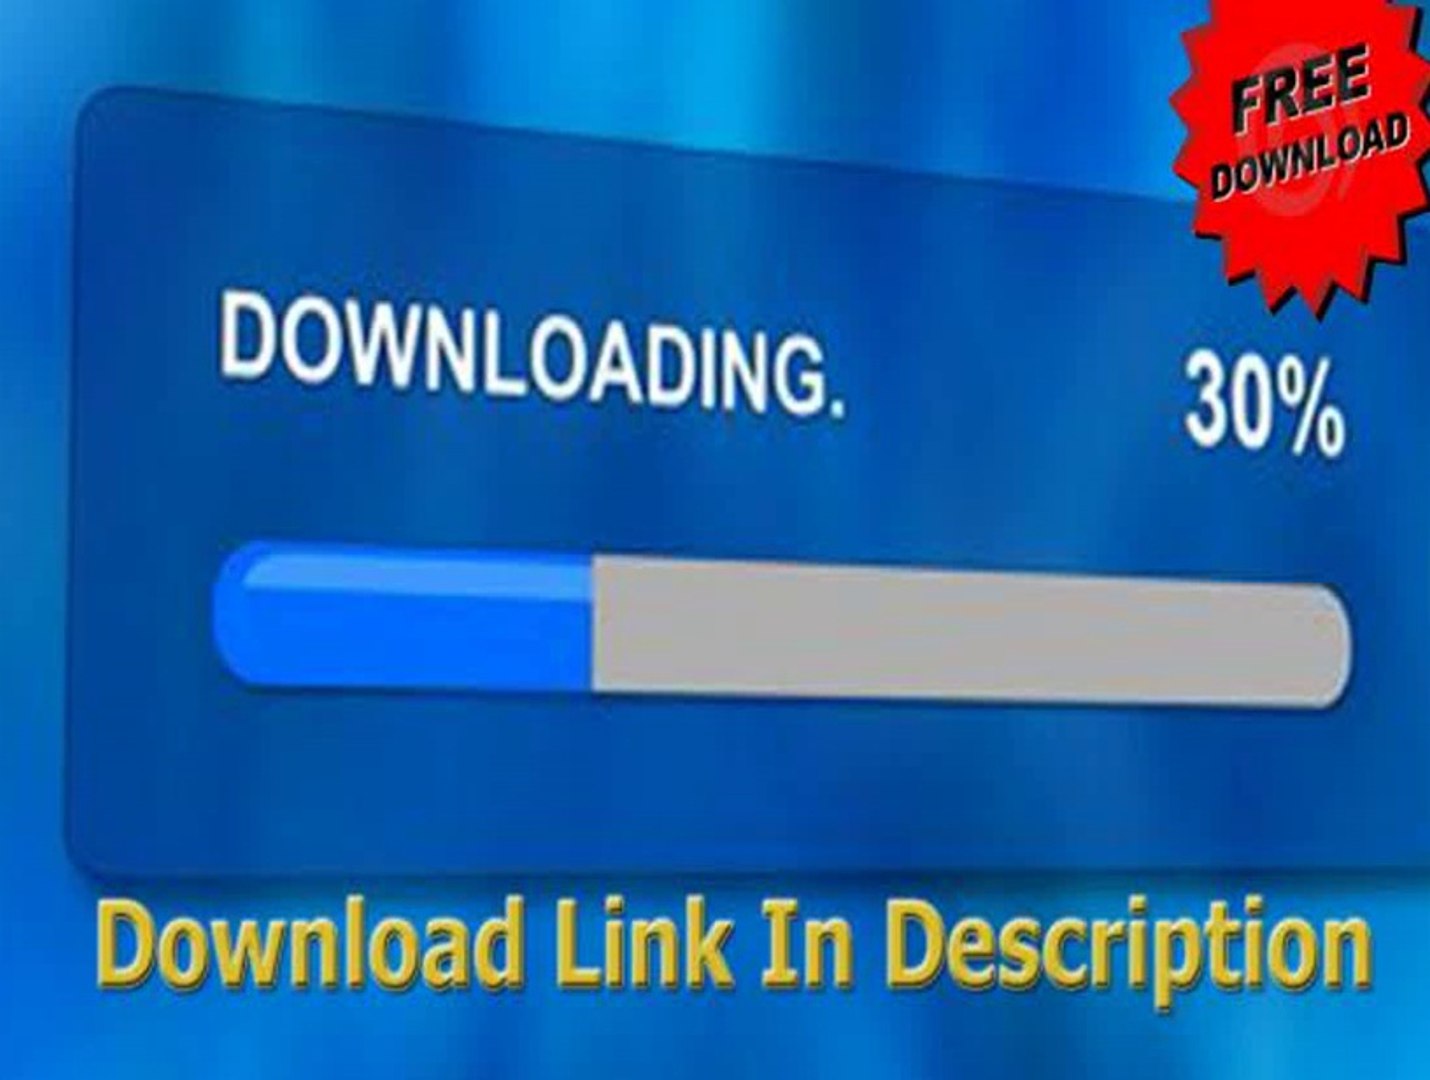 Adobe flash player 11.4 free download for android